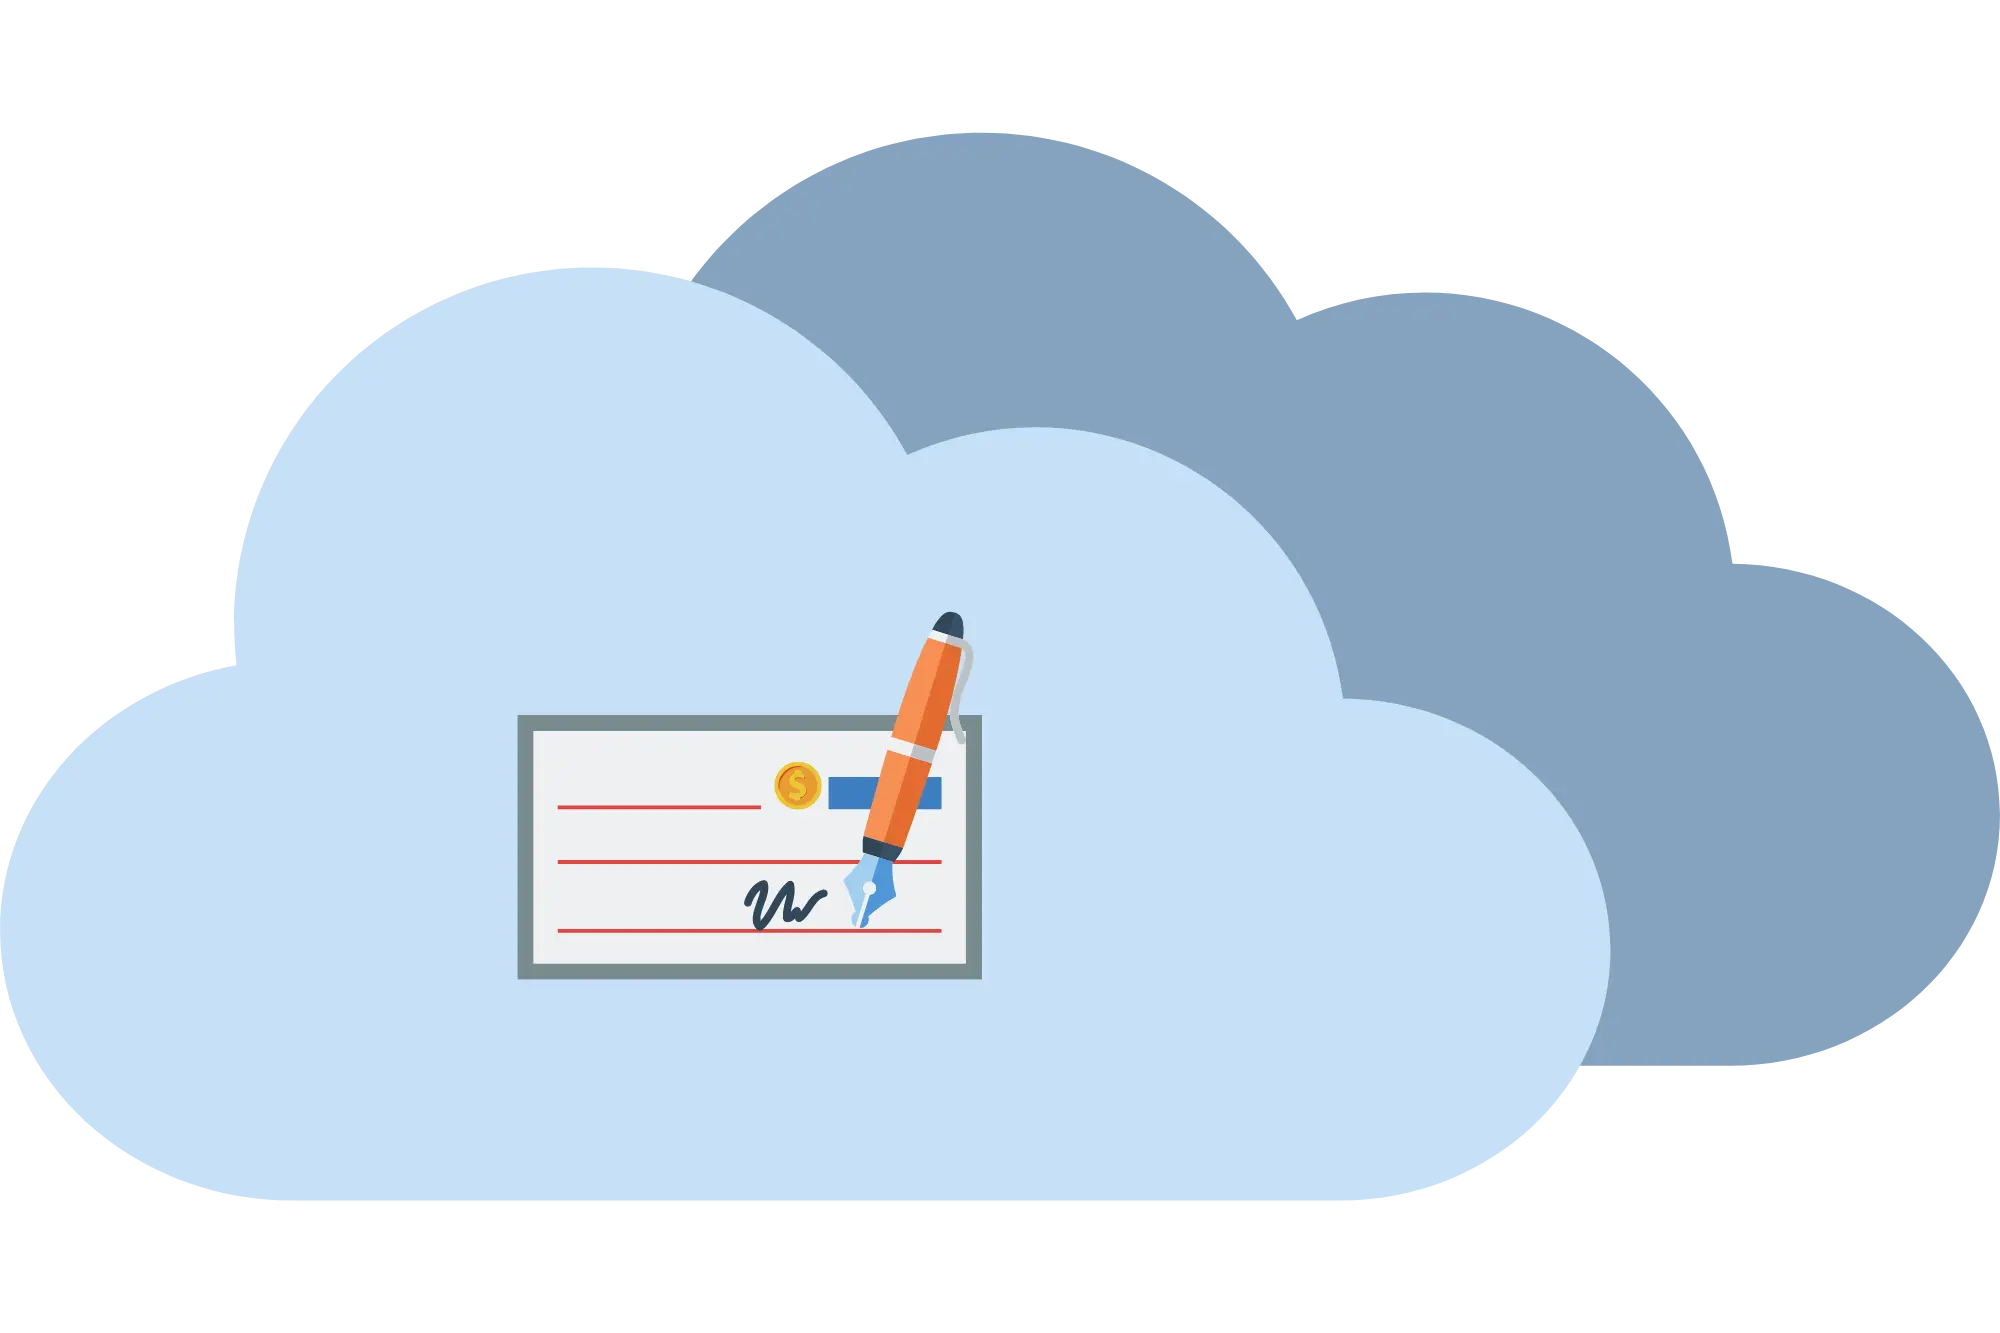 A cloud with a check in it to represent an ACH chargeback.